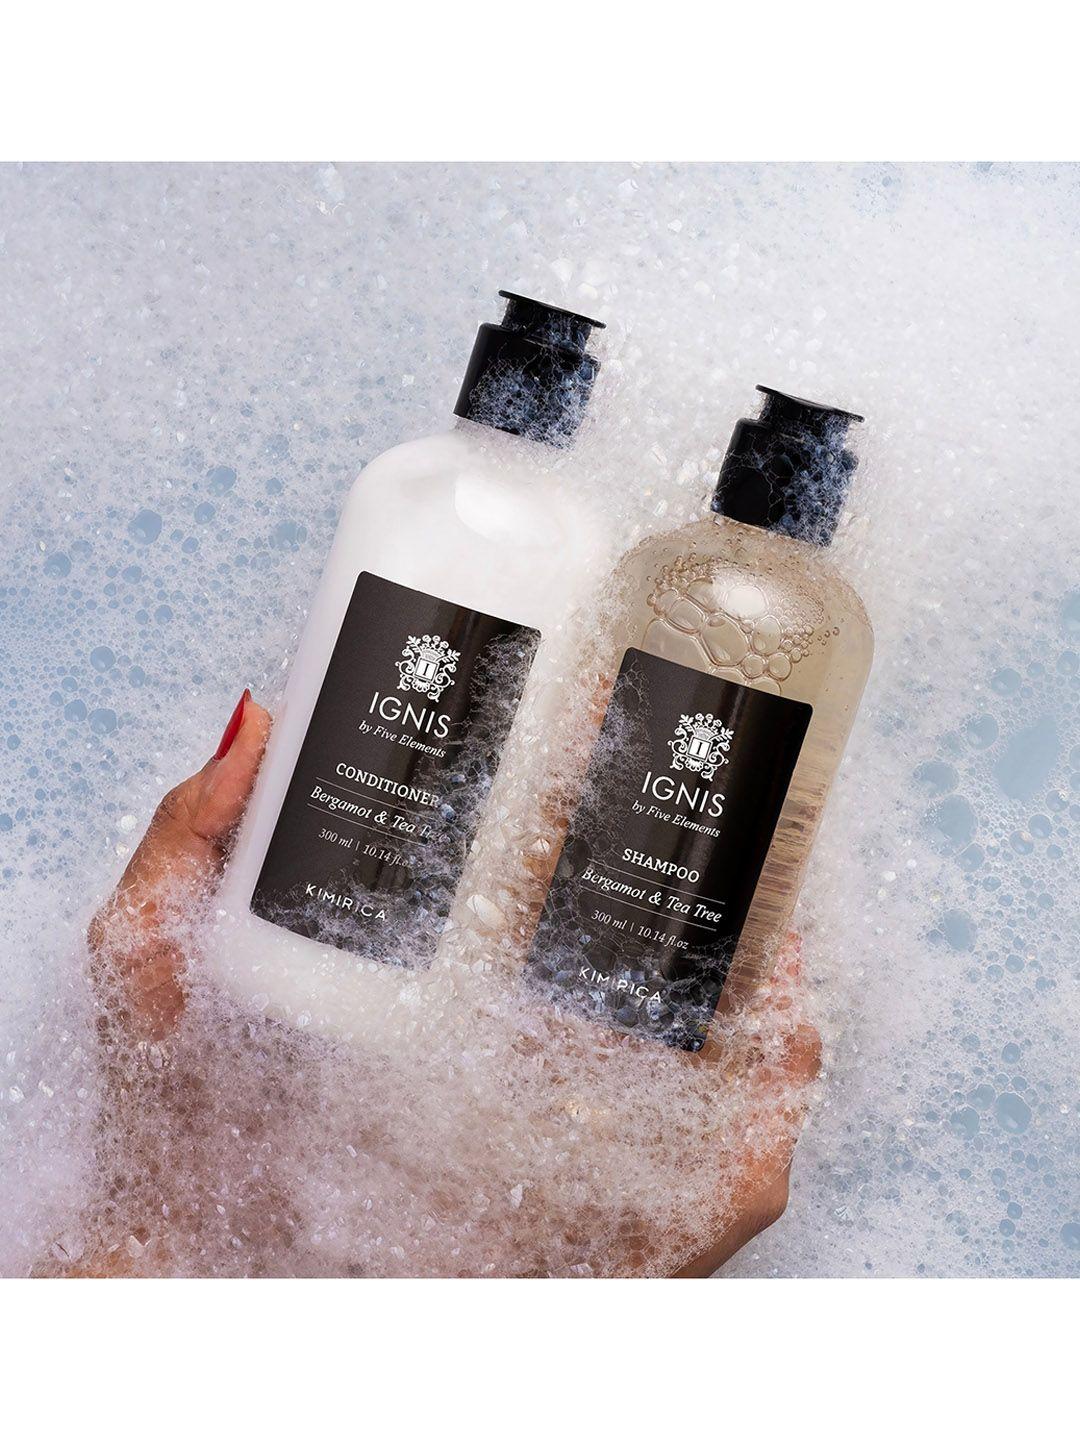 kimirica ignis daily mild shampoo & conditioner hair care duo - 300 ml each